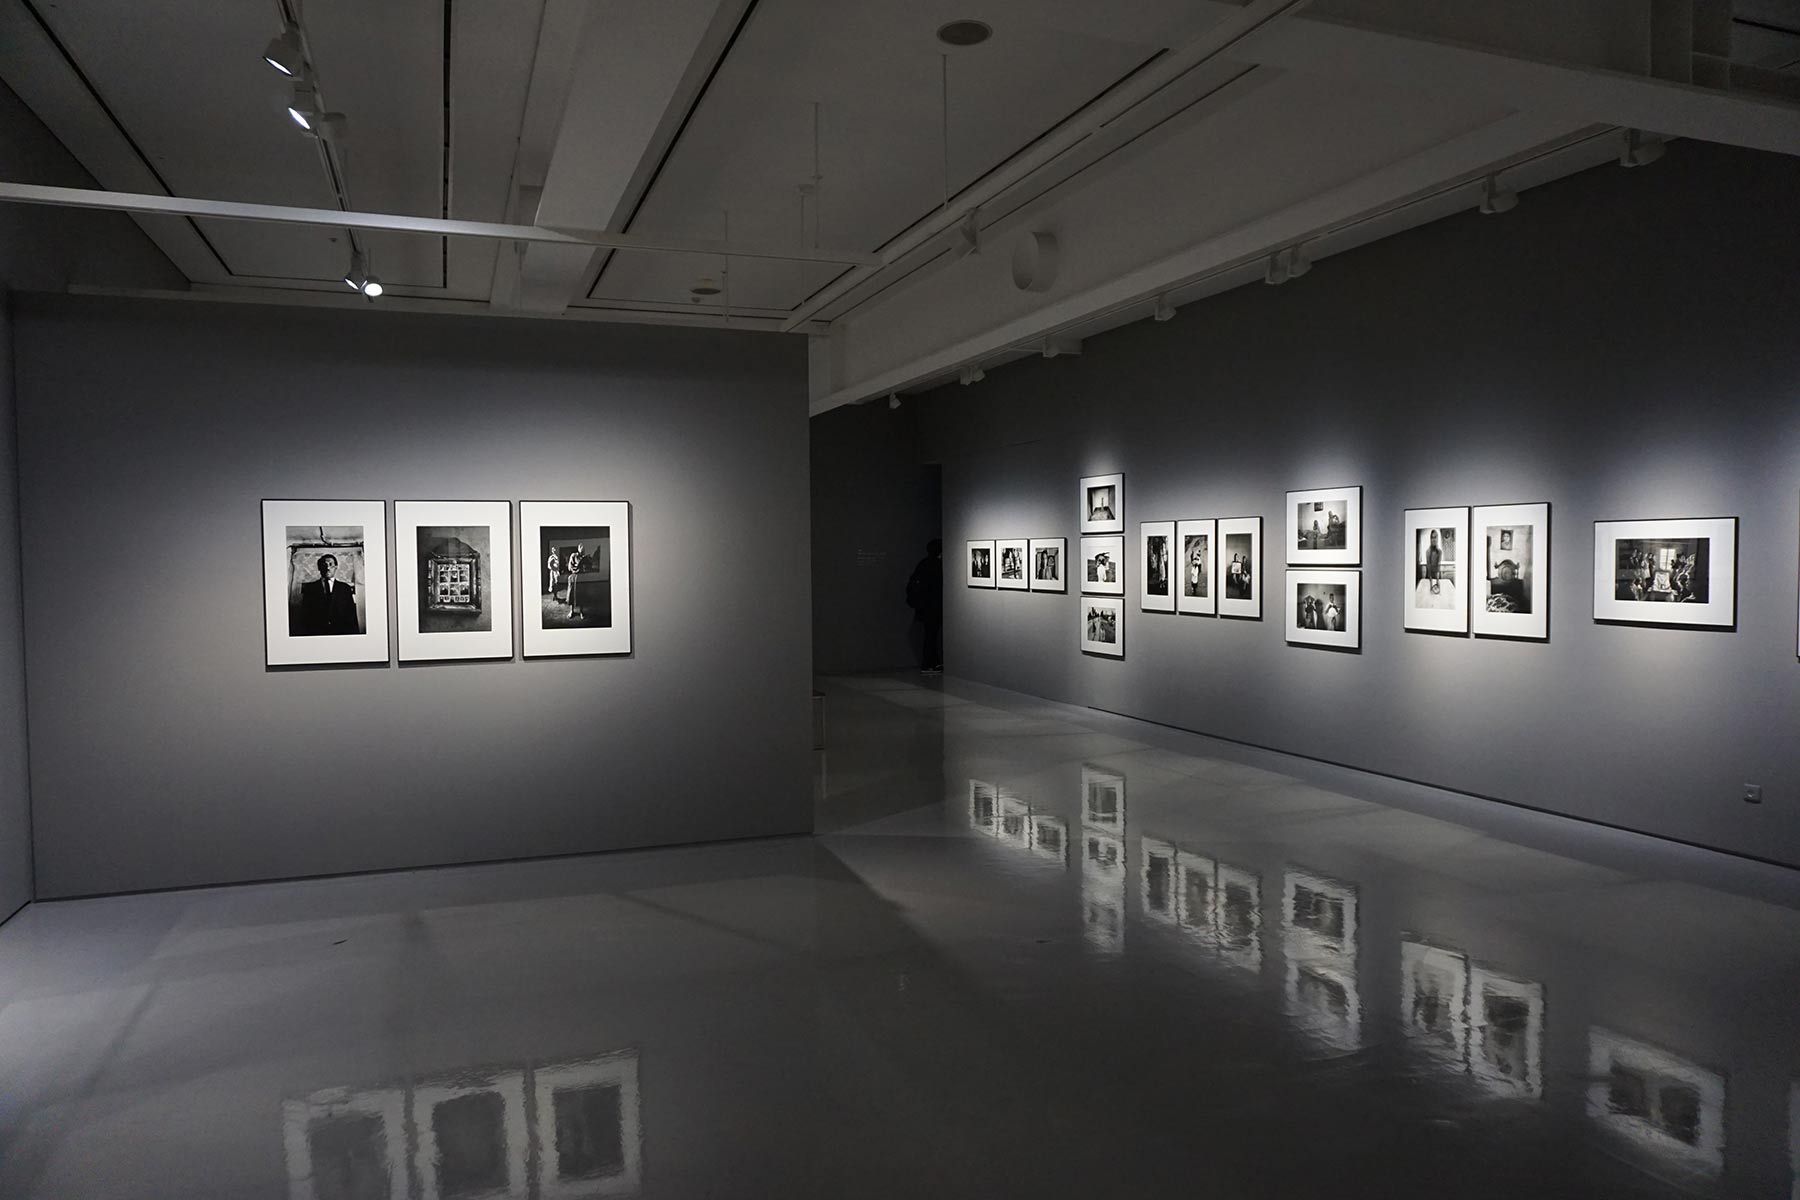 Gallery with photo art in black and white on the walls